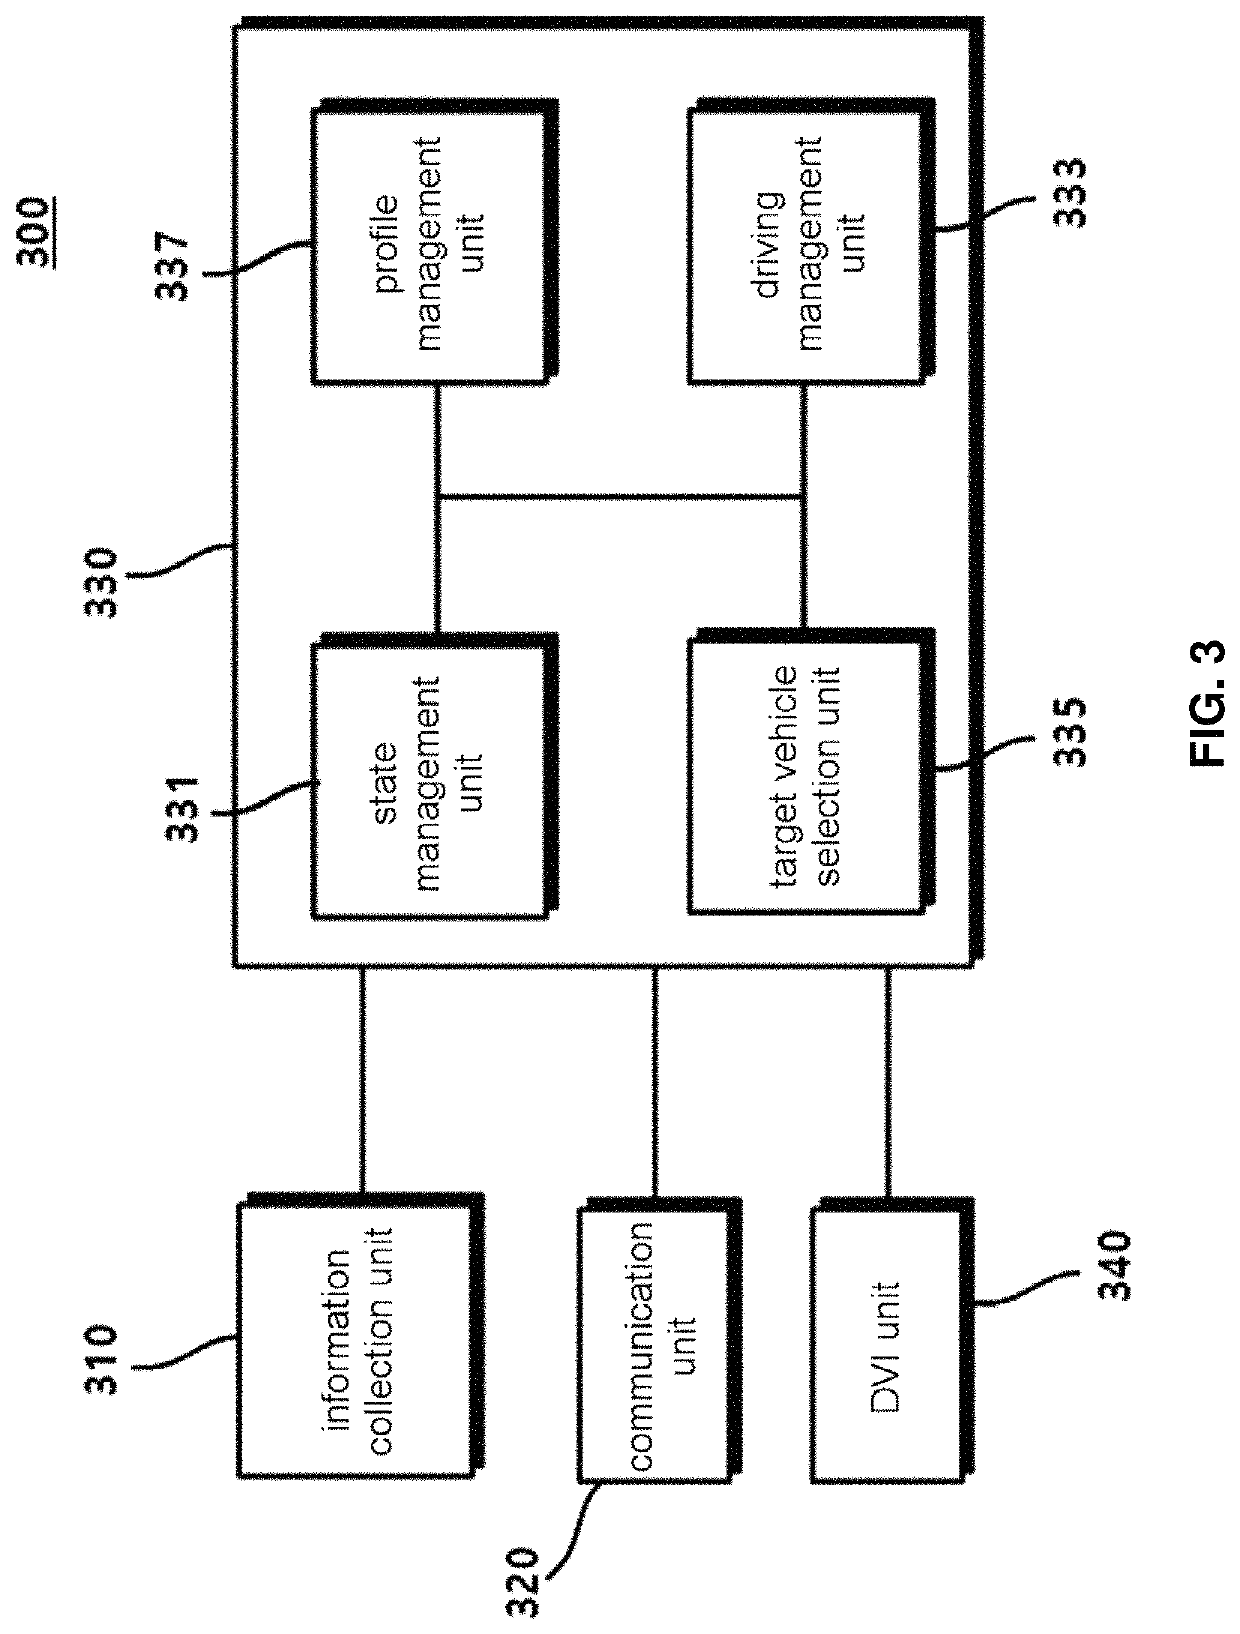 Apparatus and method for controlling speed in cooperative adaptive cruise control system